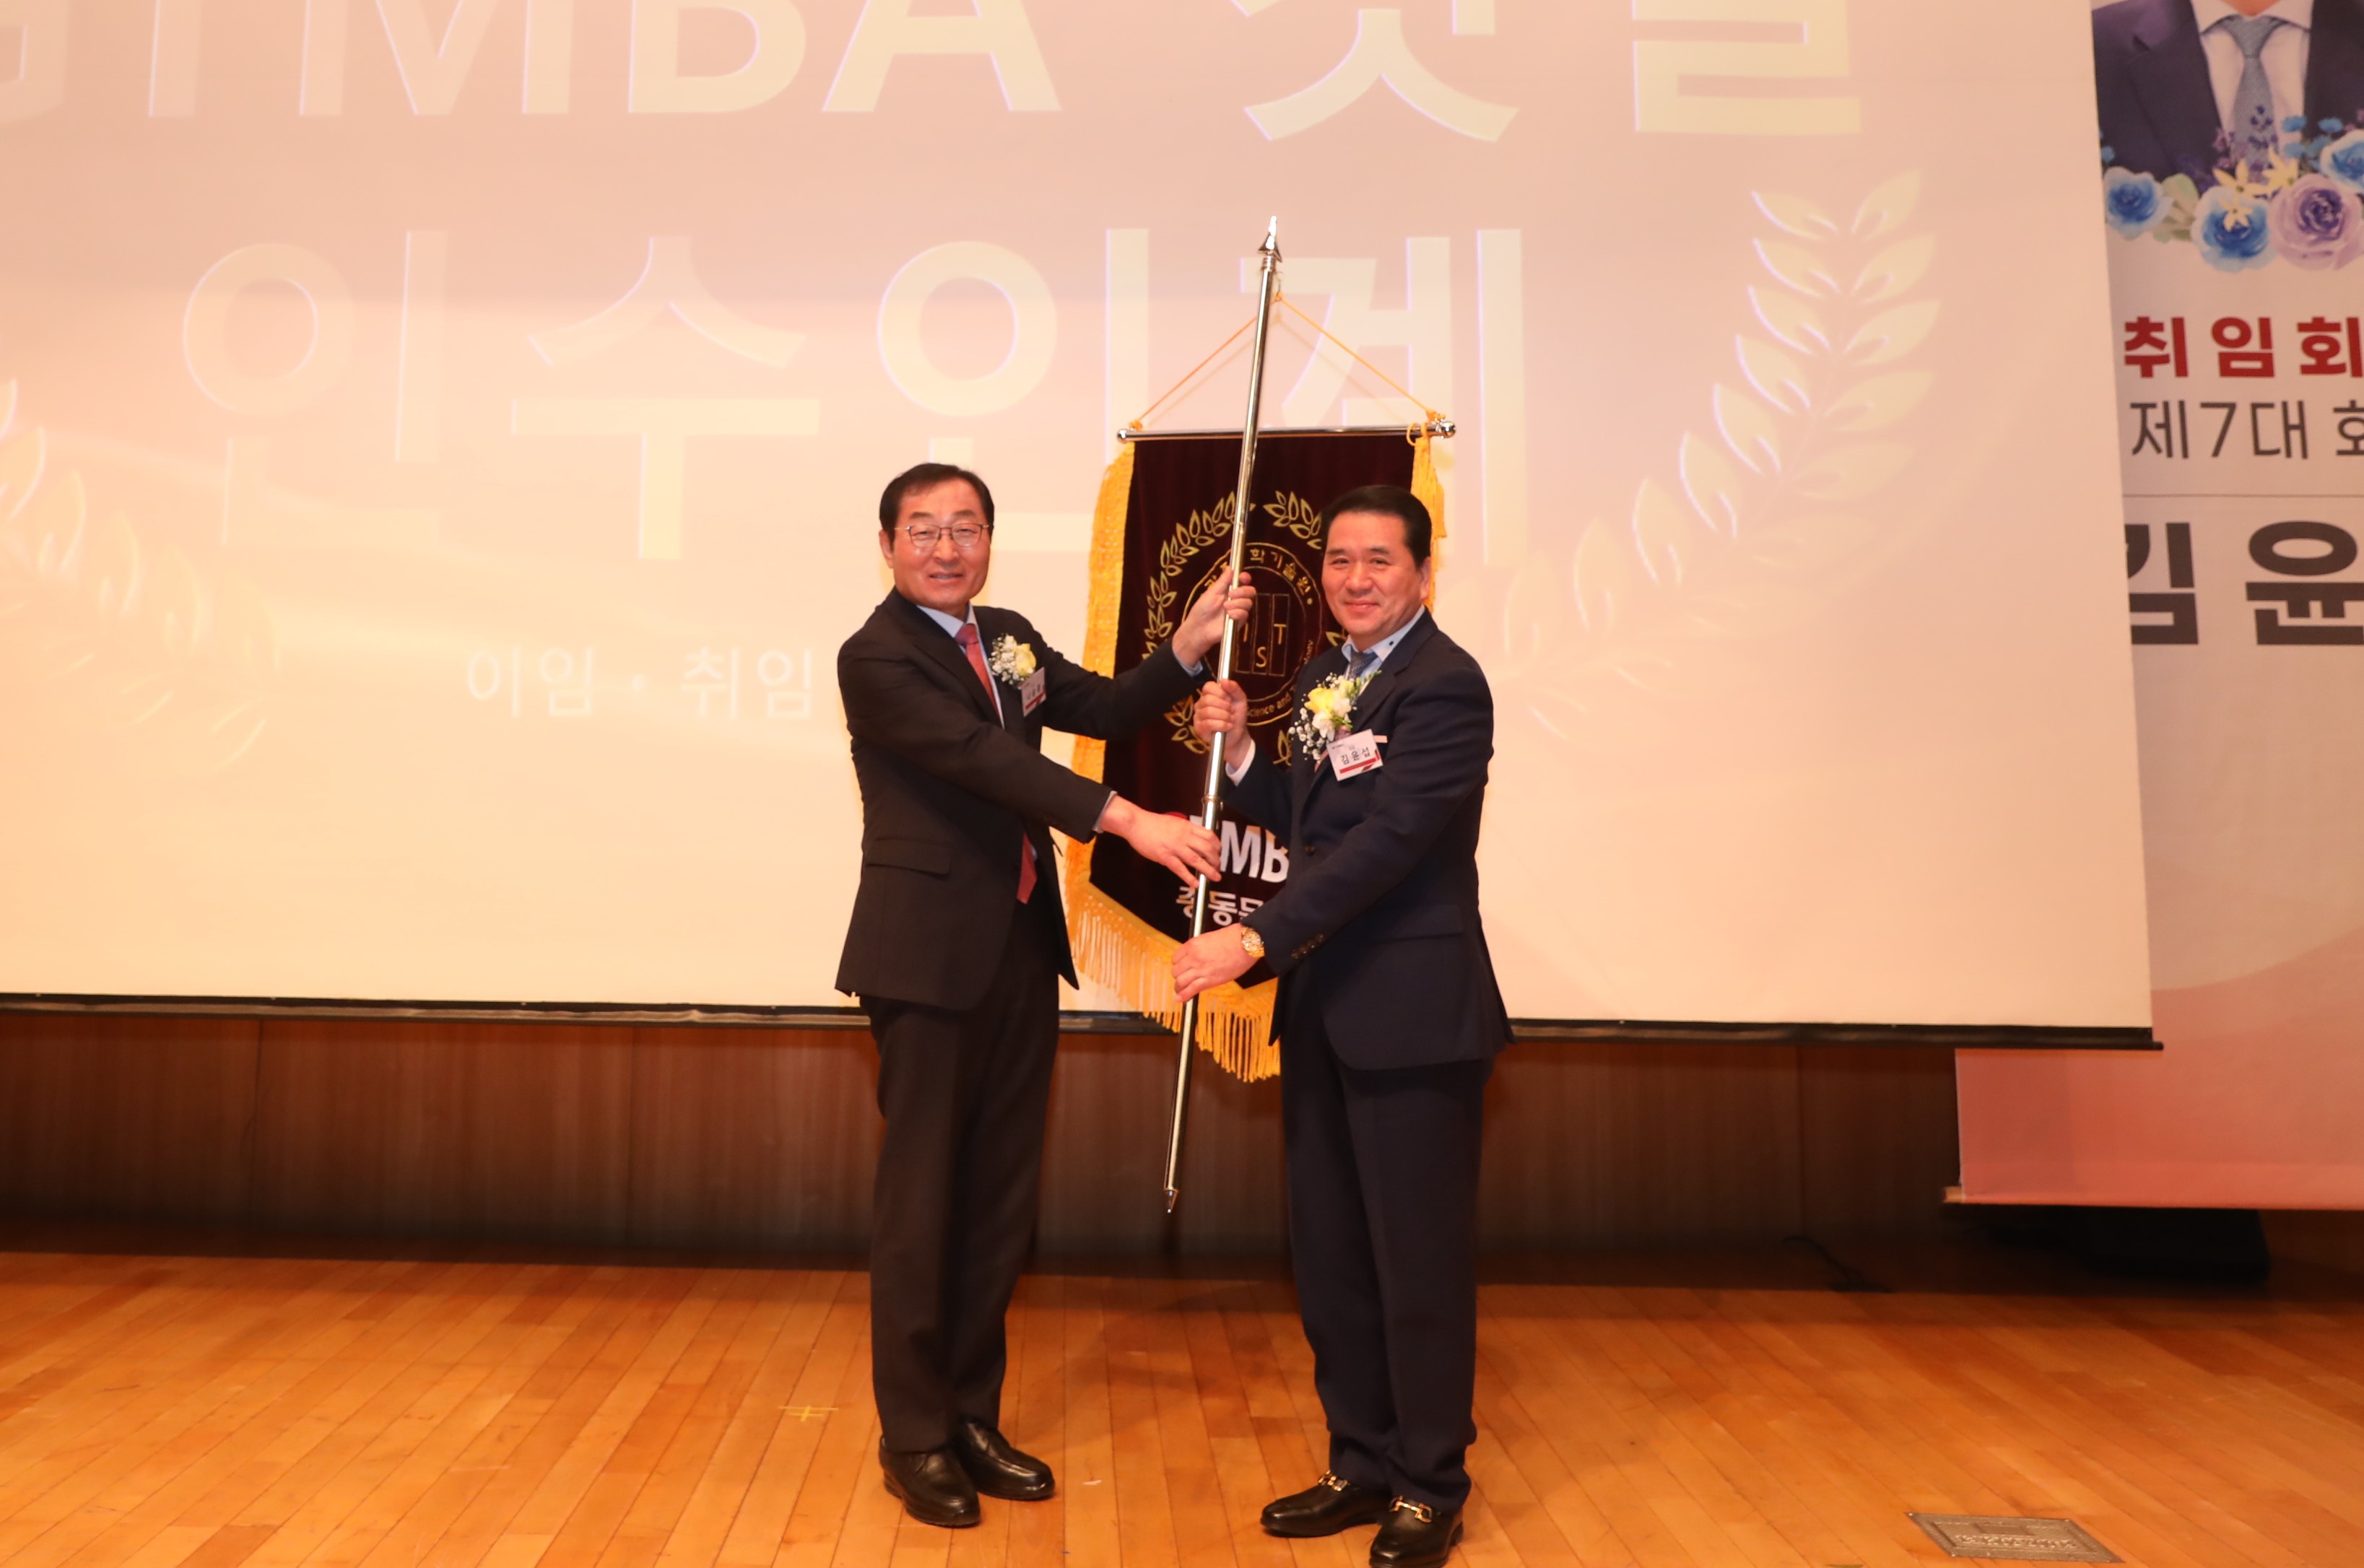 Yun-seop Kim, Chairman of Hanyoung P&S Co., Ltd., inaugurated as President of GIST Techno Management Business Academy Alumni Association 이미지